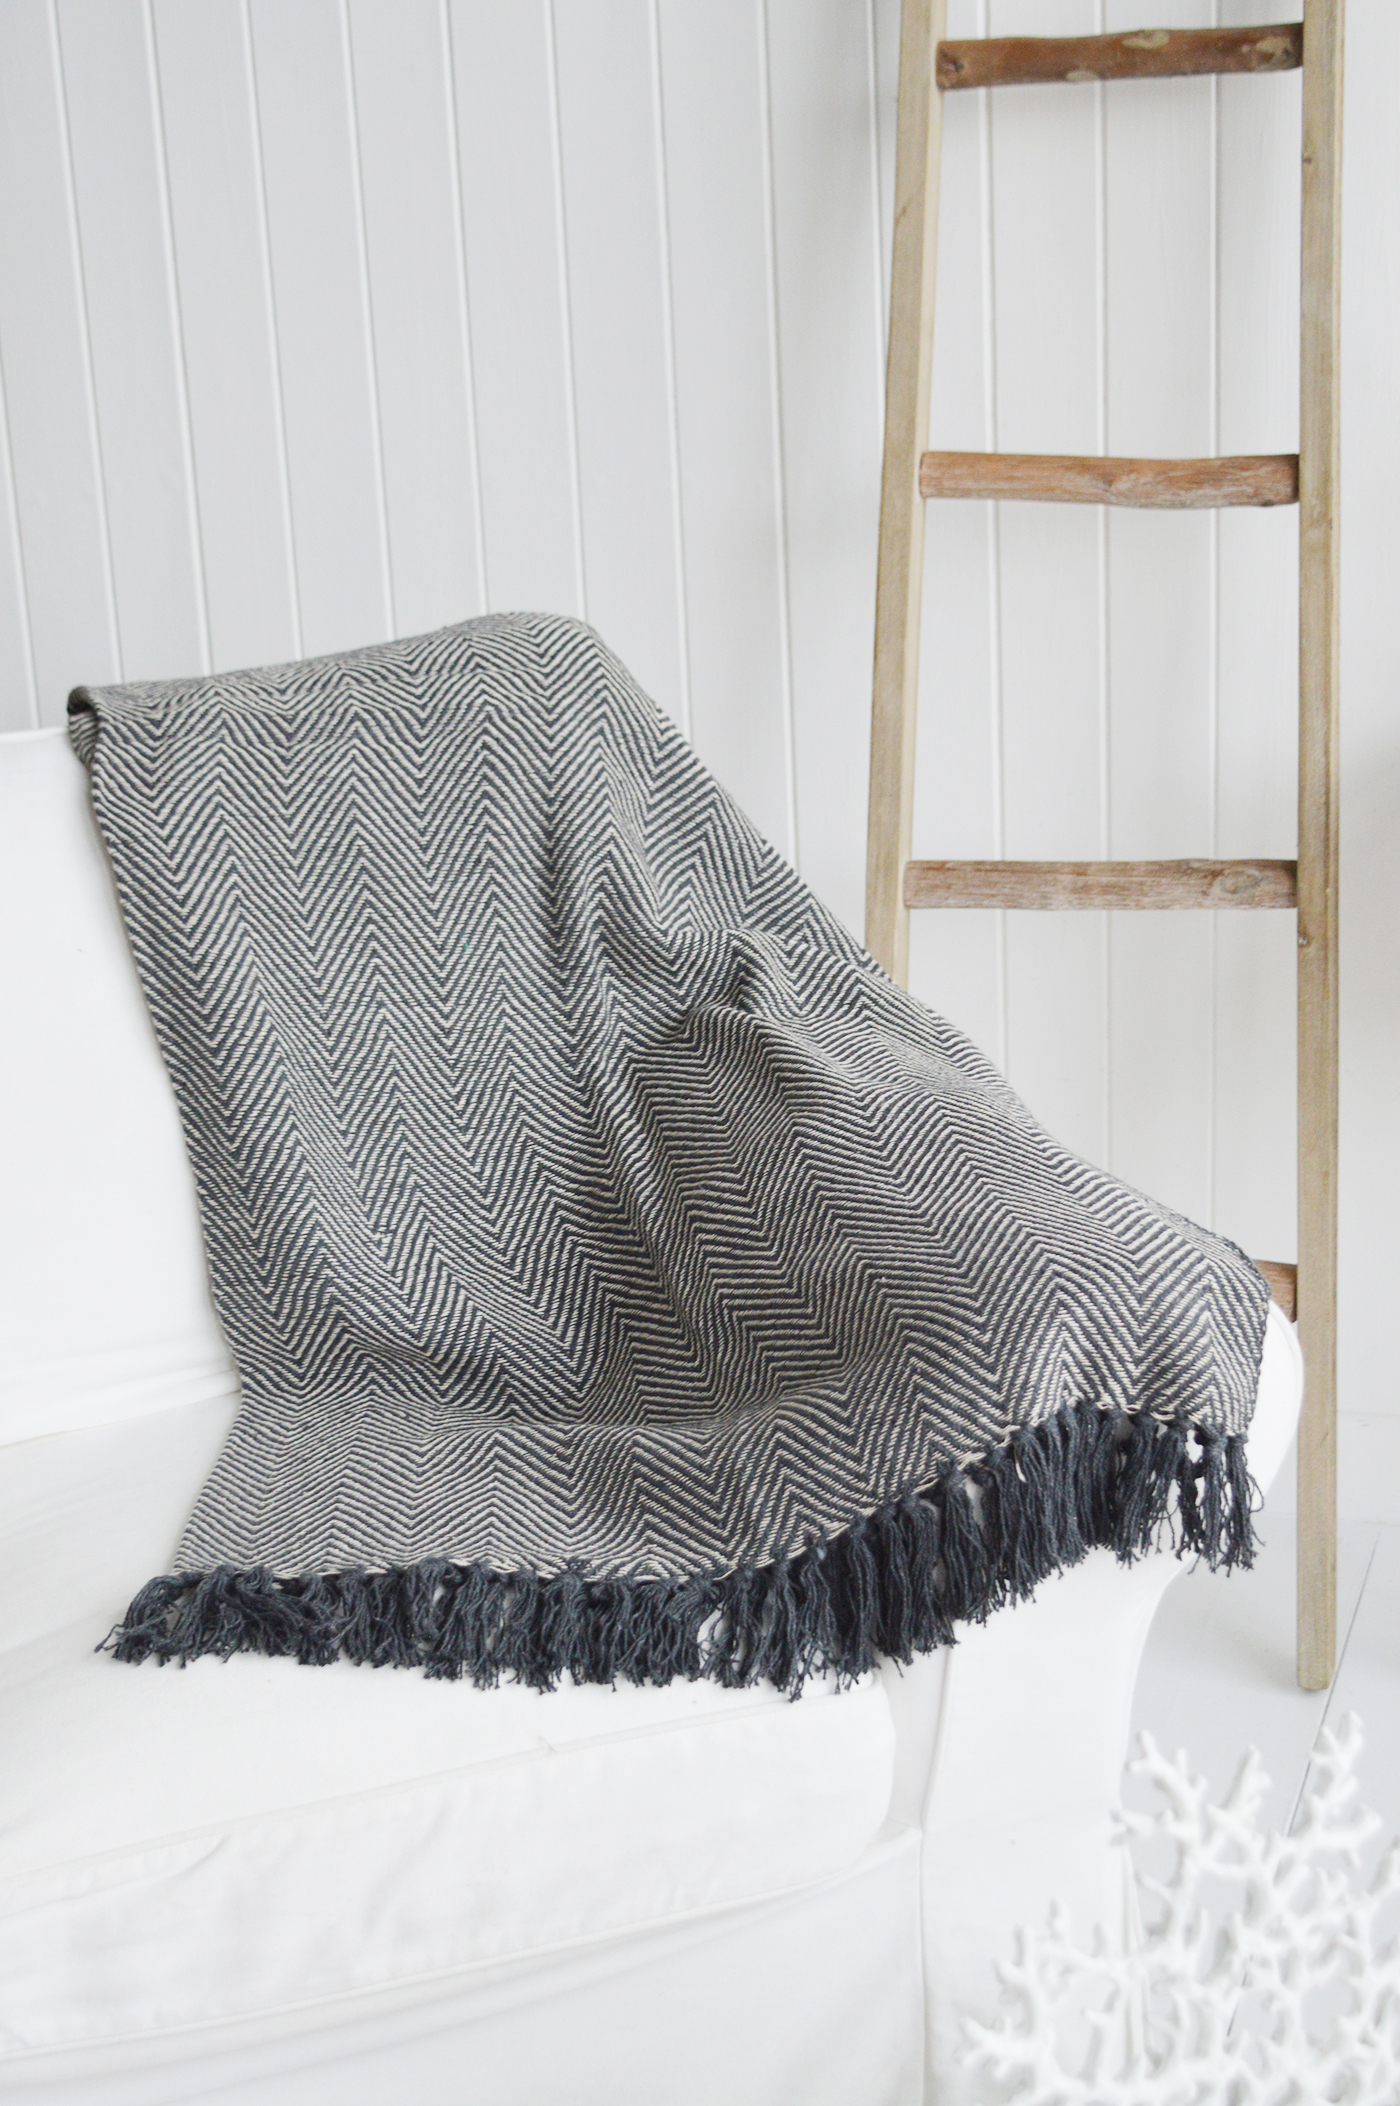 Grey Herringbone throw, blanket or bedspread from The White Lighthouse Furniture and Home Interiors